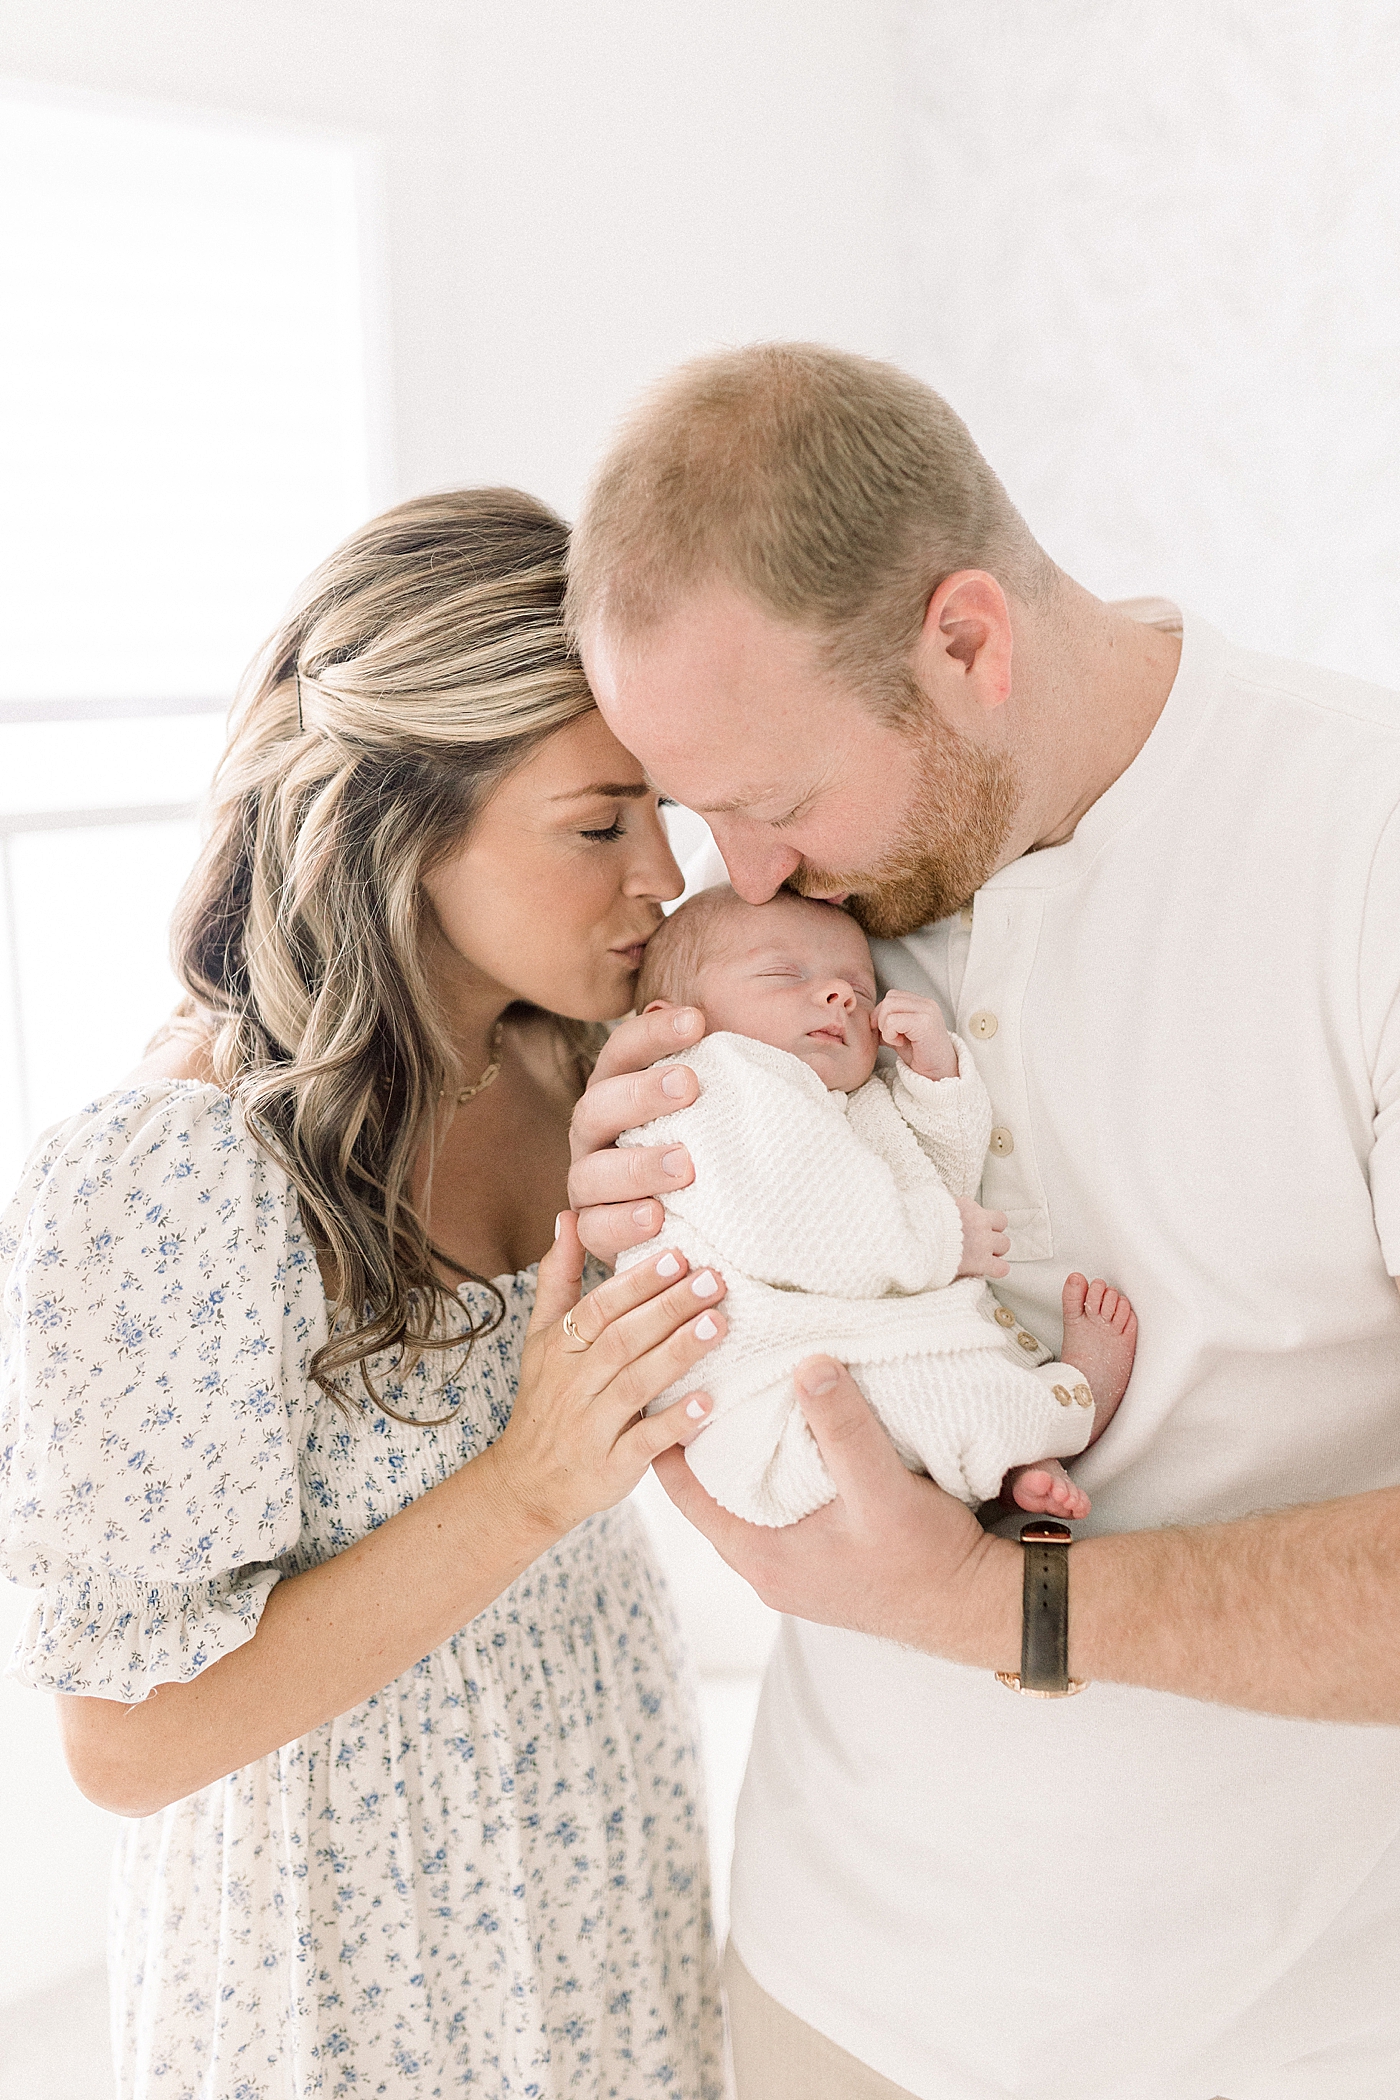 Mom and dad kissing their new baby during newborn photos | Photo by Caitlyn Motycka Photography